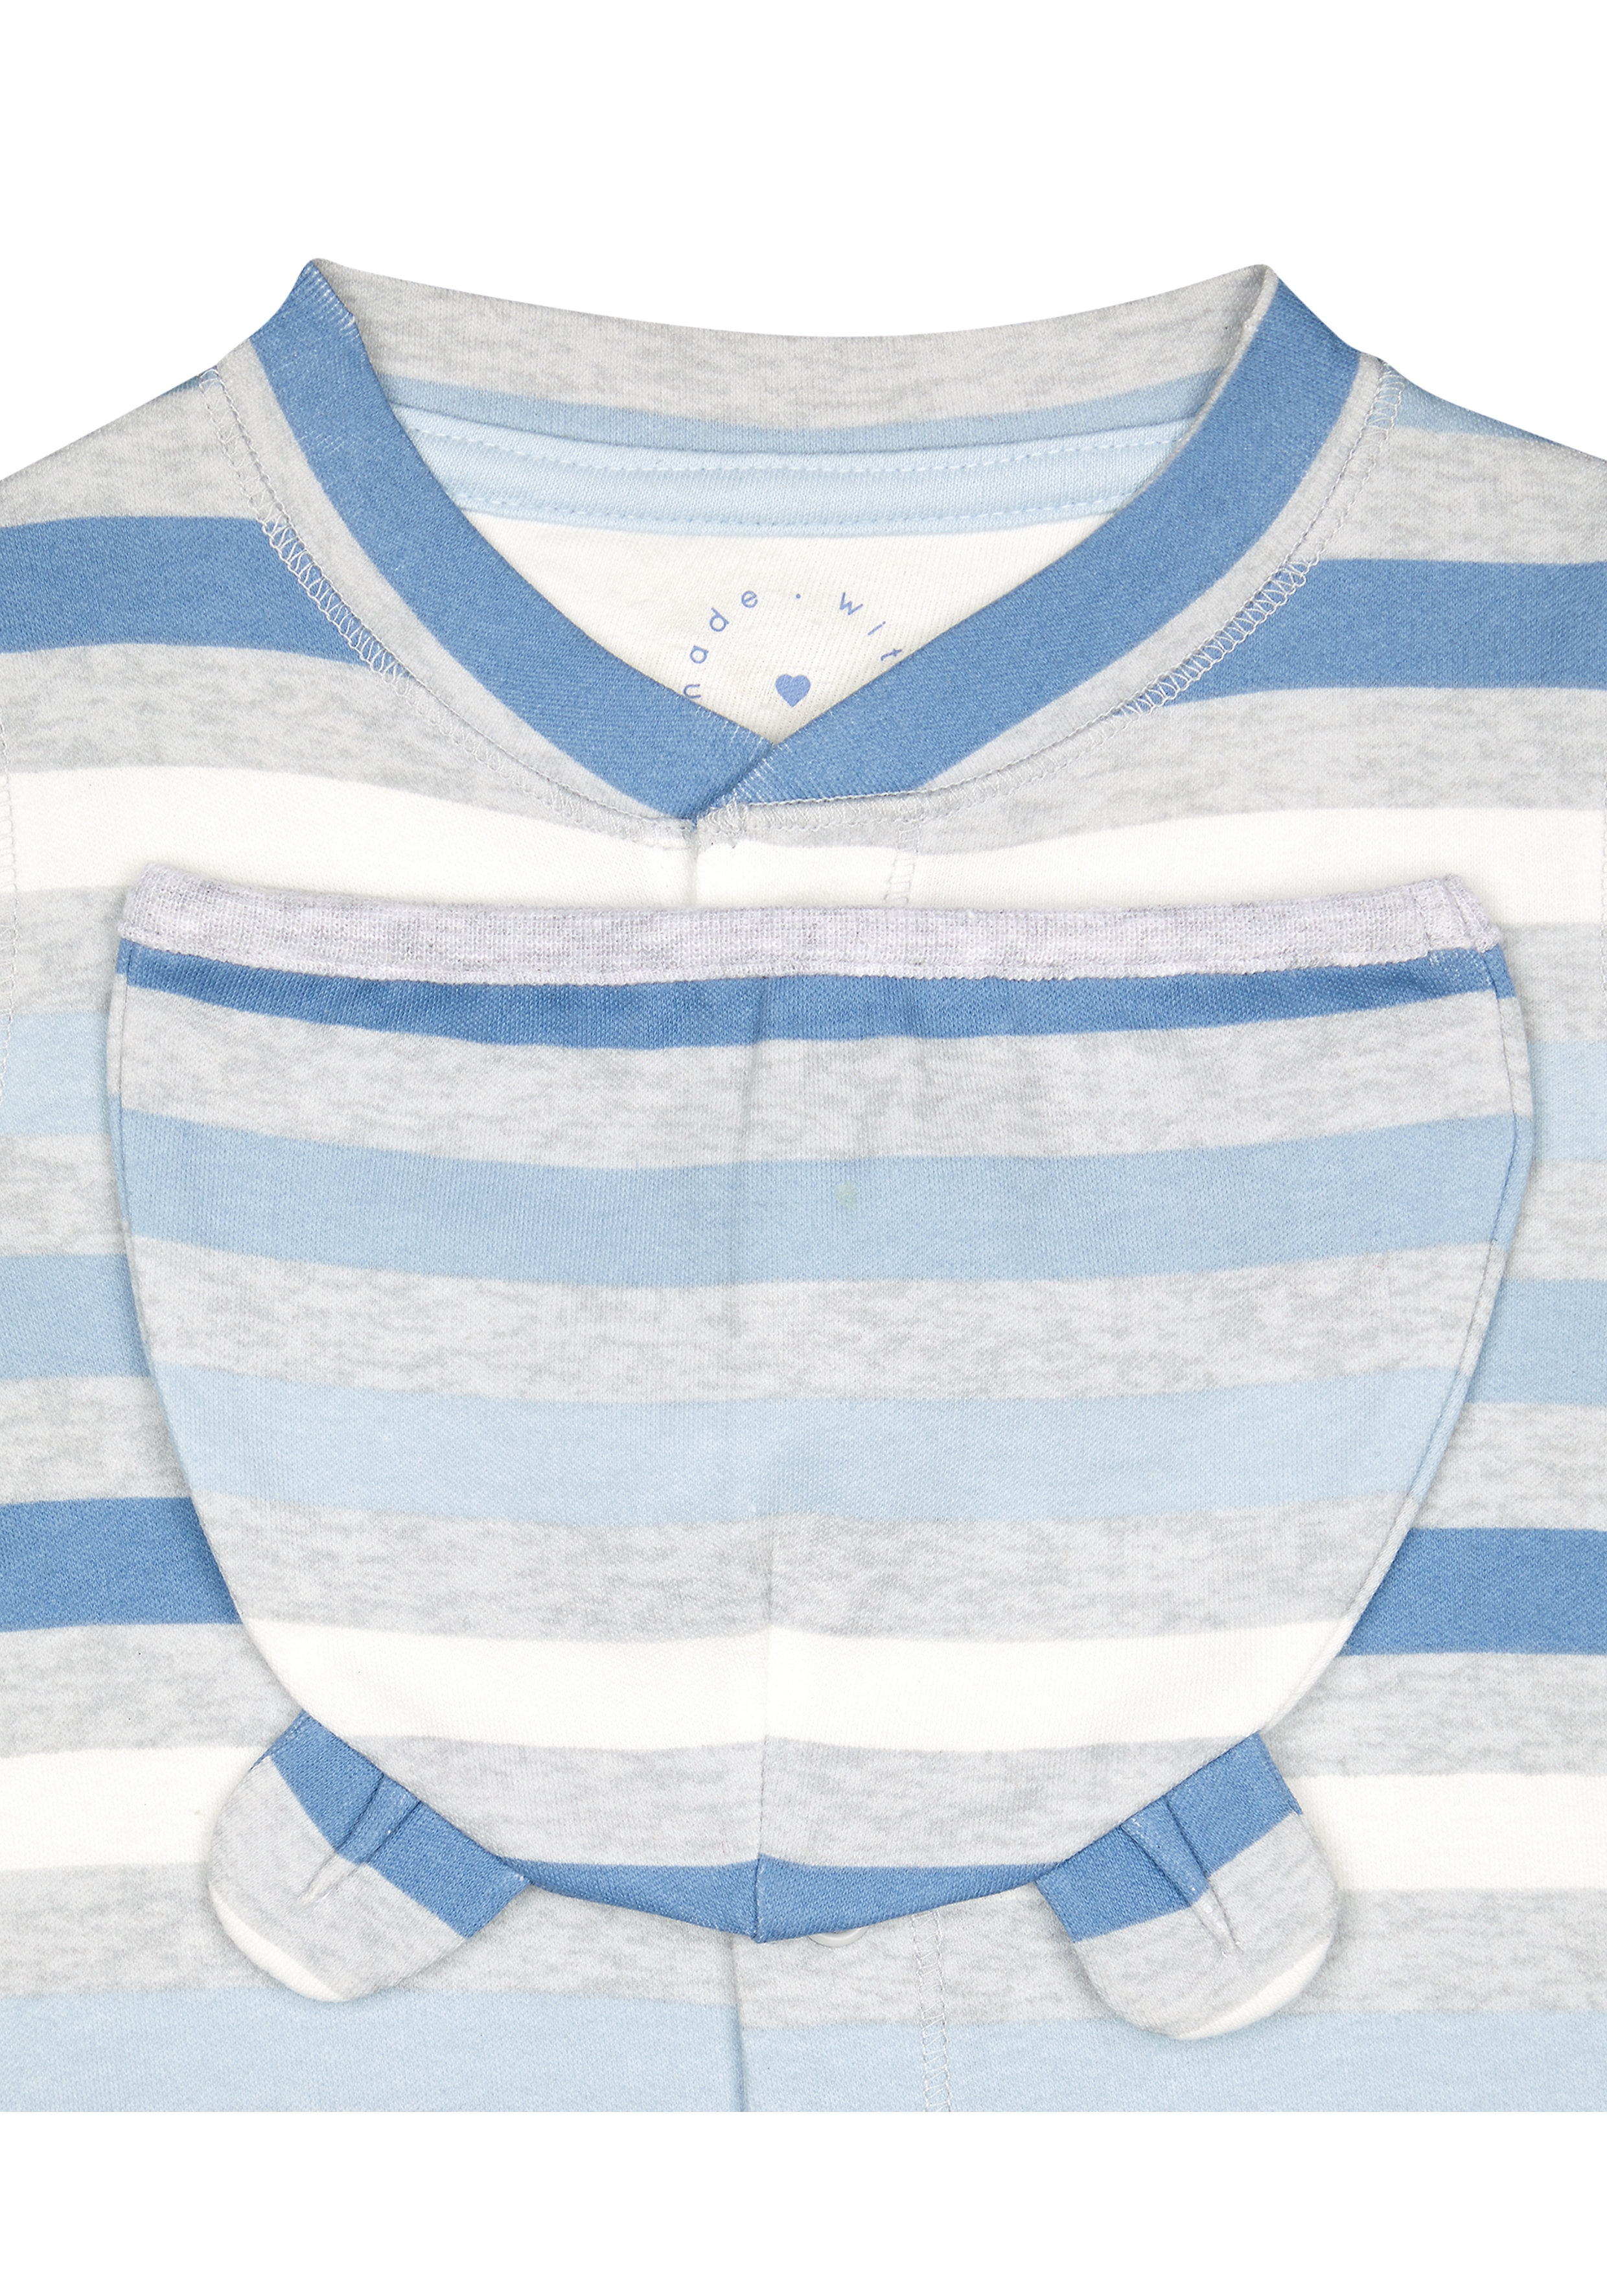 Mothercare | Boys Full Sleeves Striped Romper And Hat Set 3D Ear Detail - Blue 4